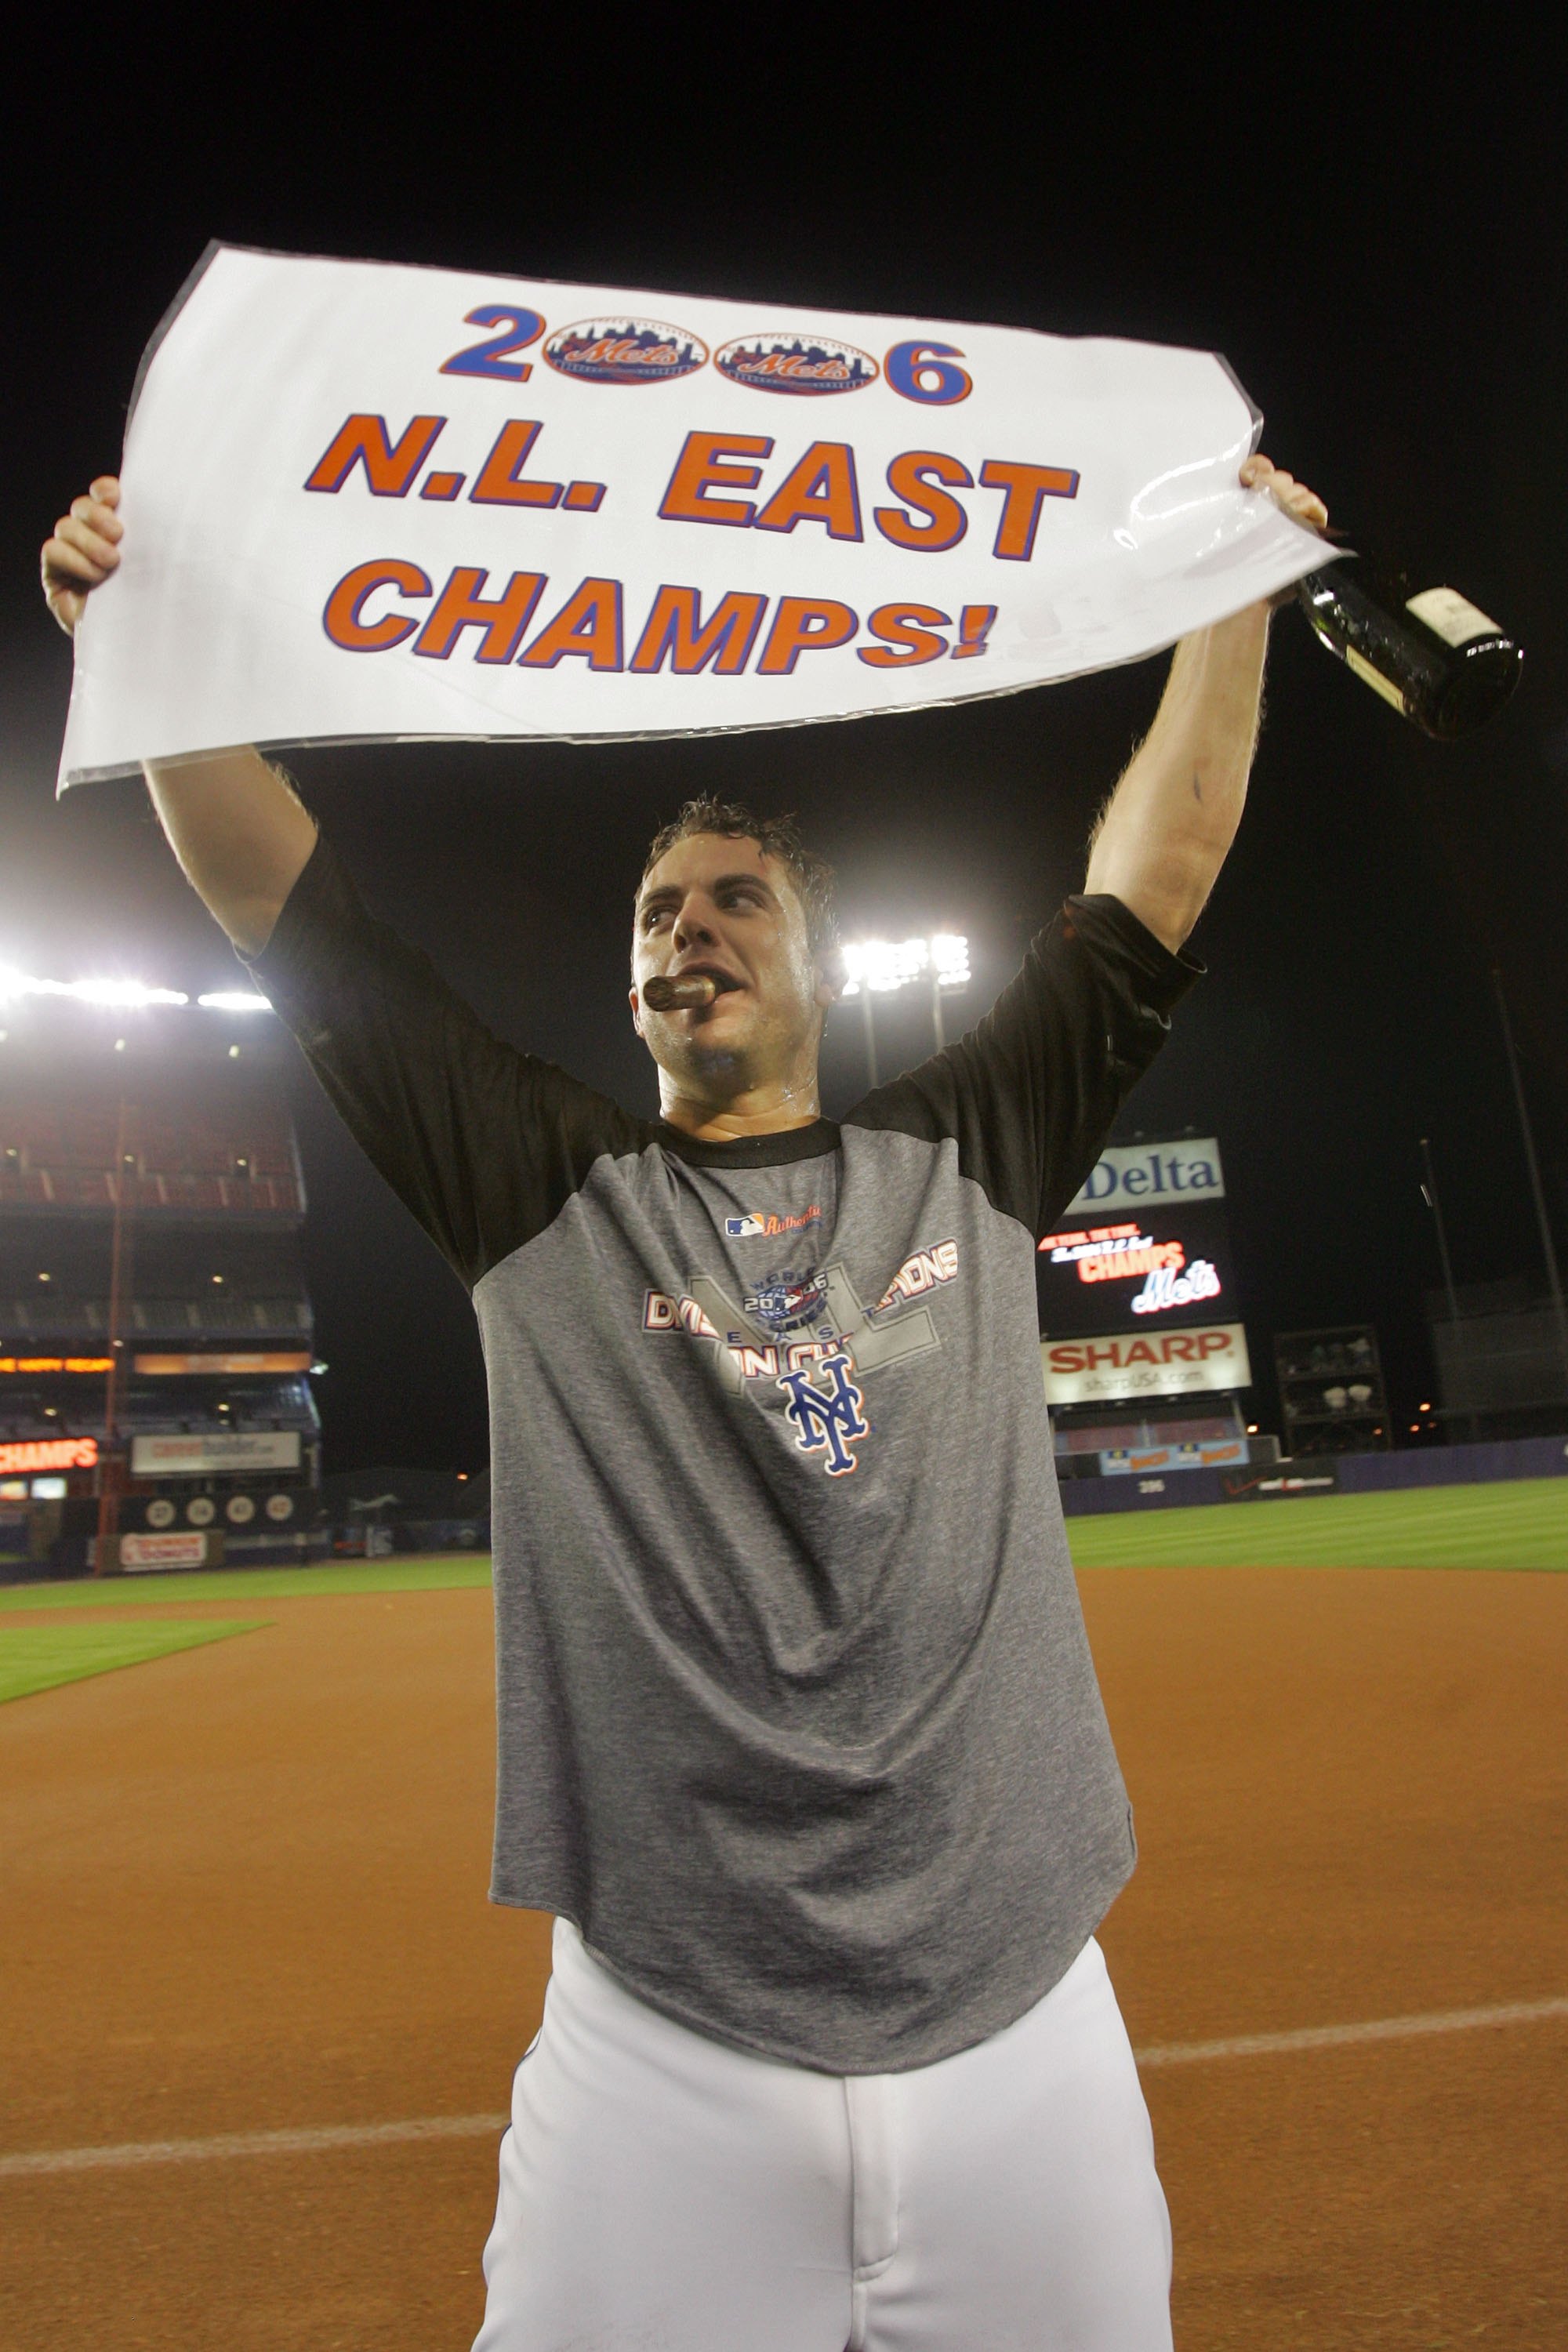 New York Mets: 10 Things the Mets Need To Make the Playoffs